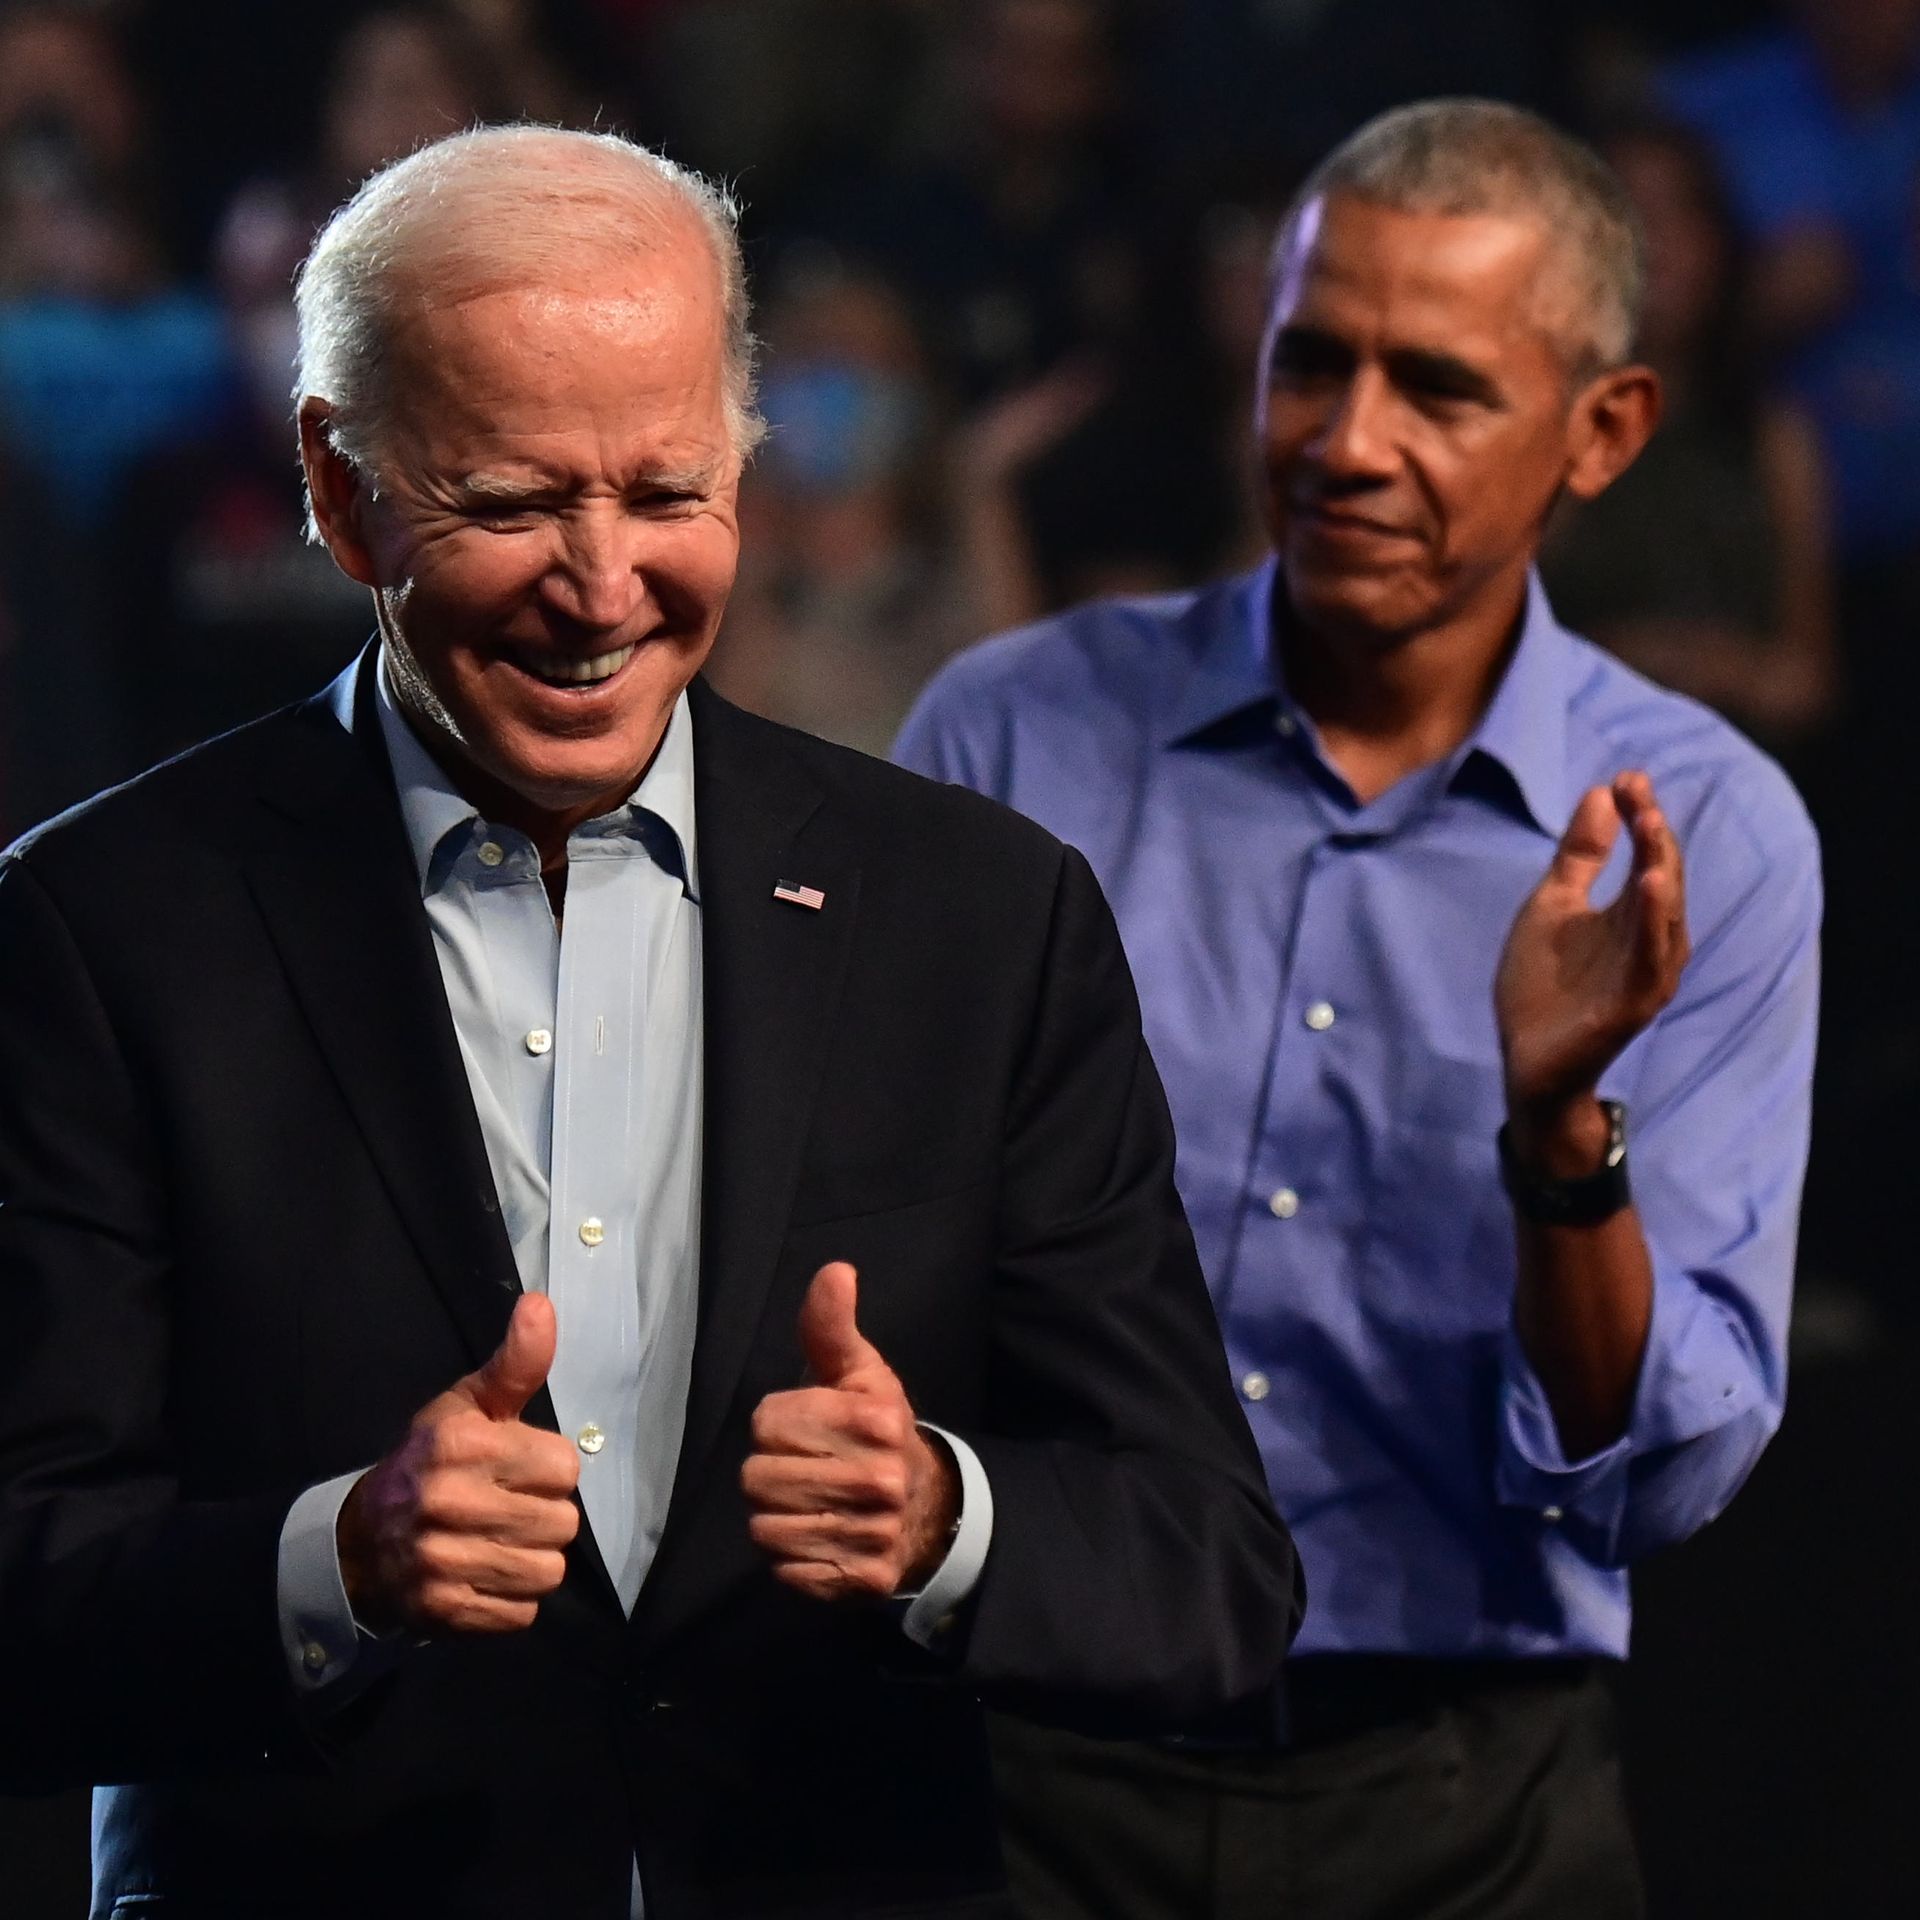 Obama would be jealous": How Biden's rivalry with his ex-boss shapes his  presidency